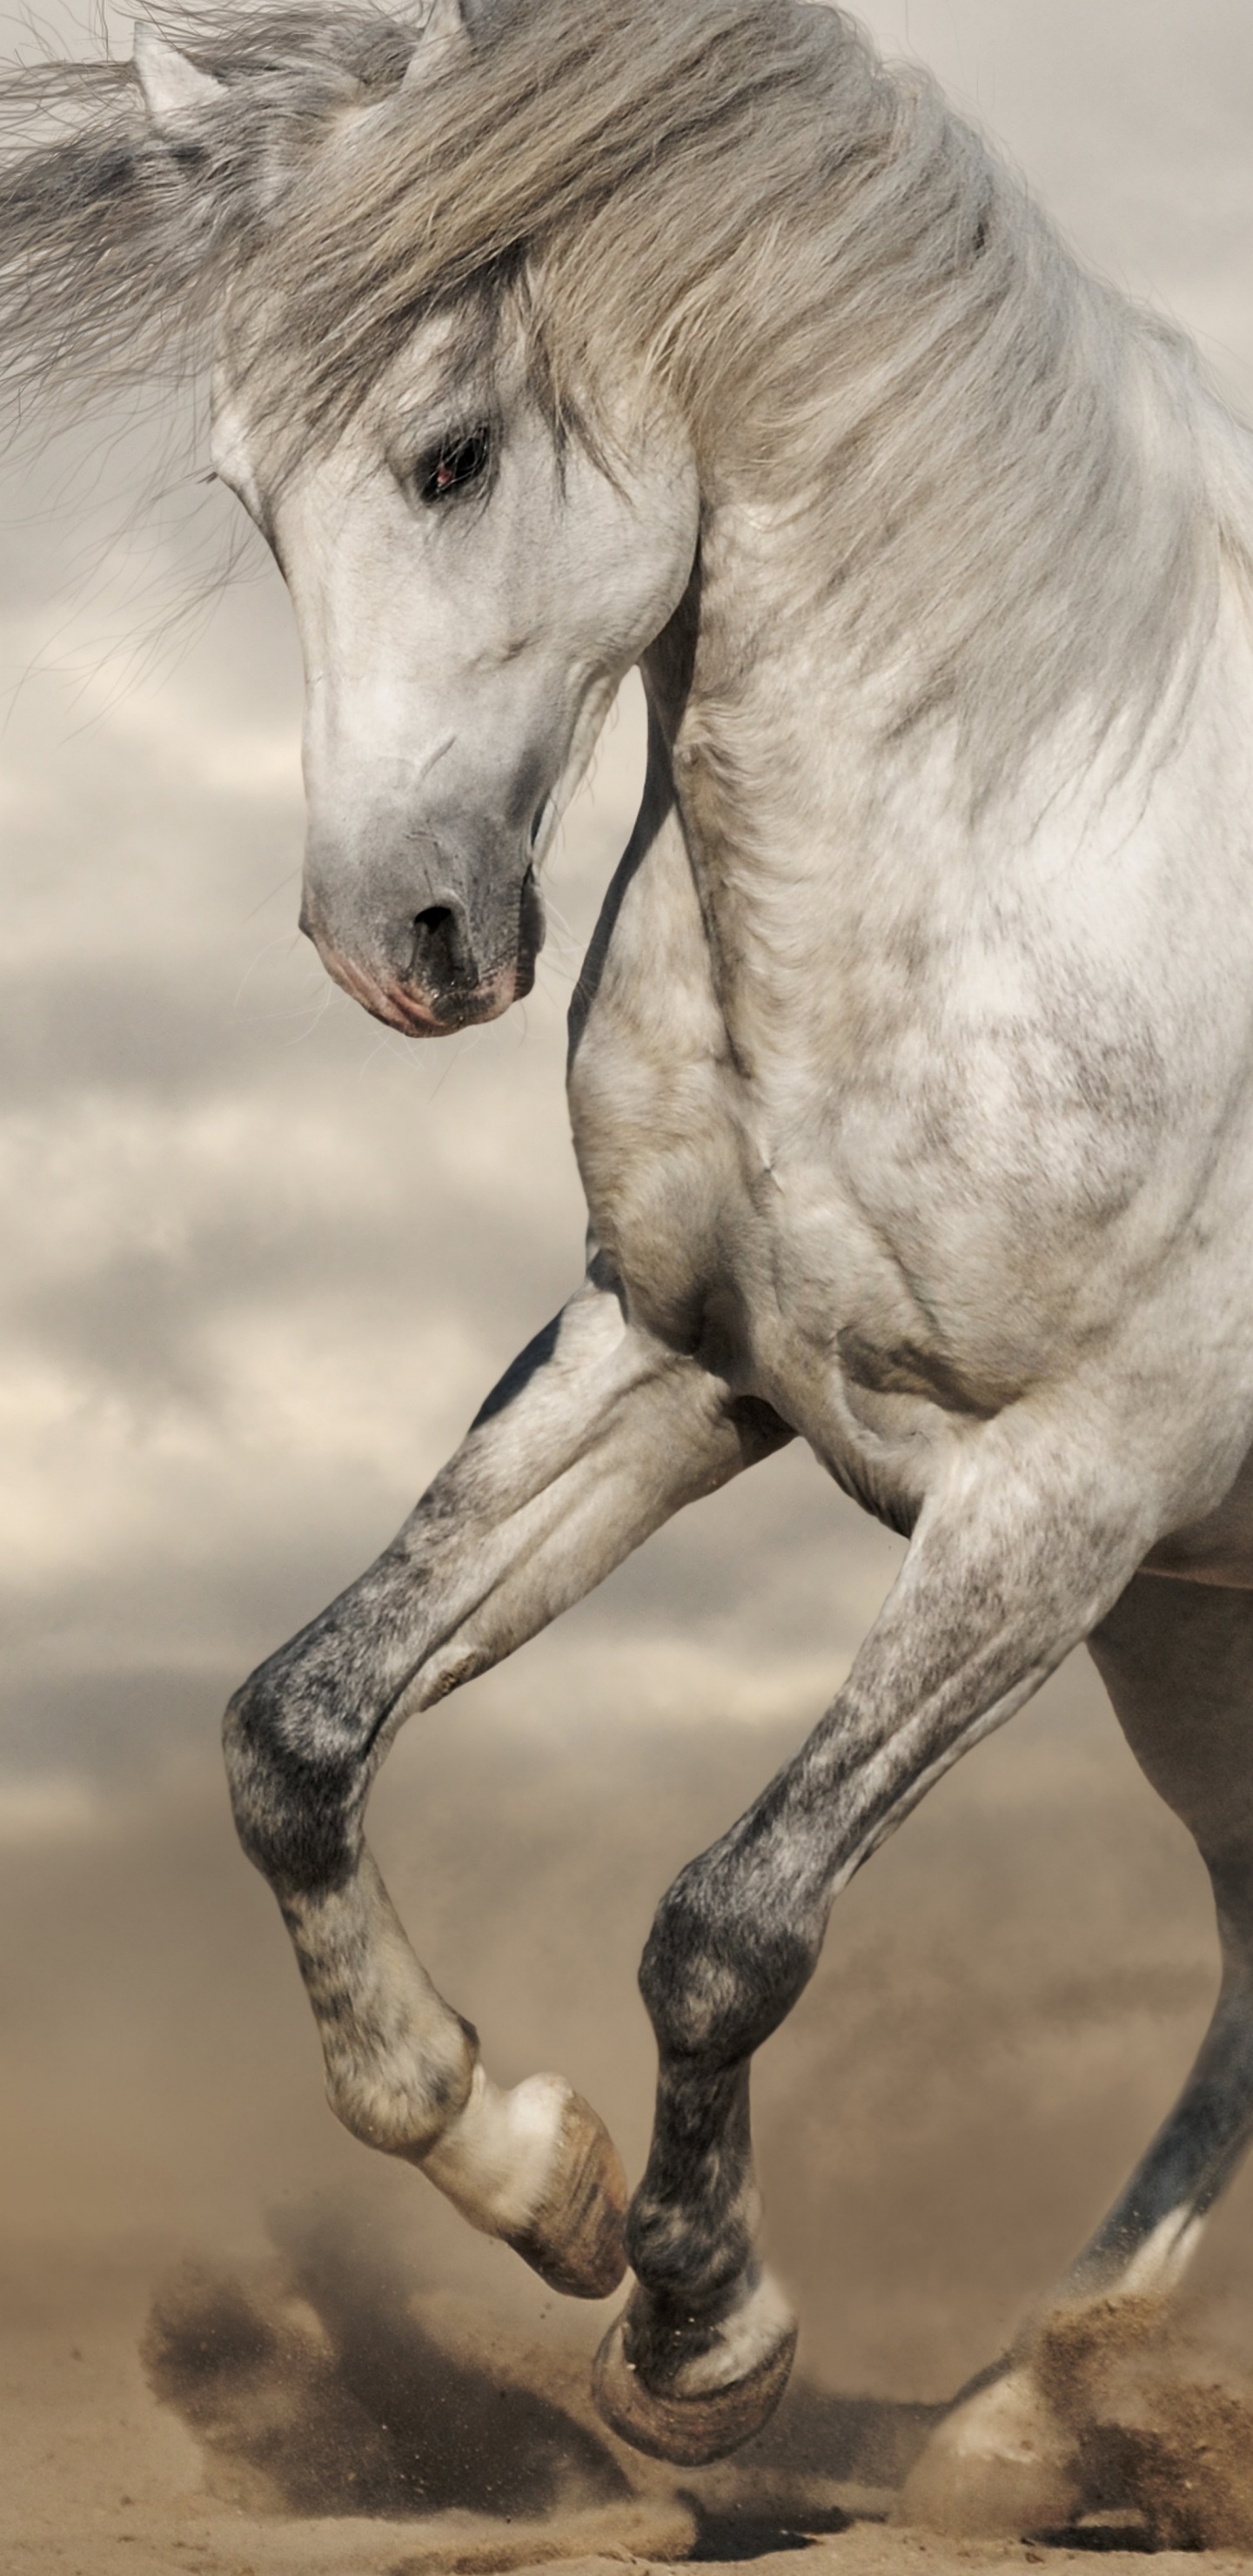 White Horse Running on Brown Sand During Daytime. Wallpaper in 1440x2960 Resolution